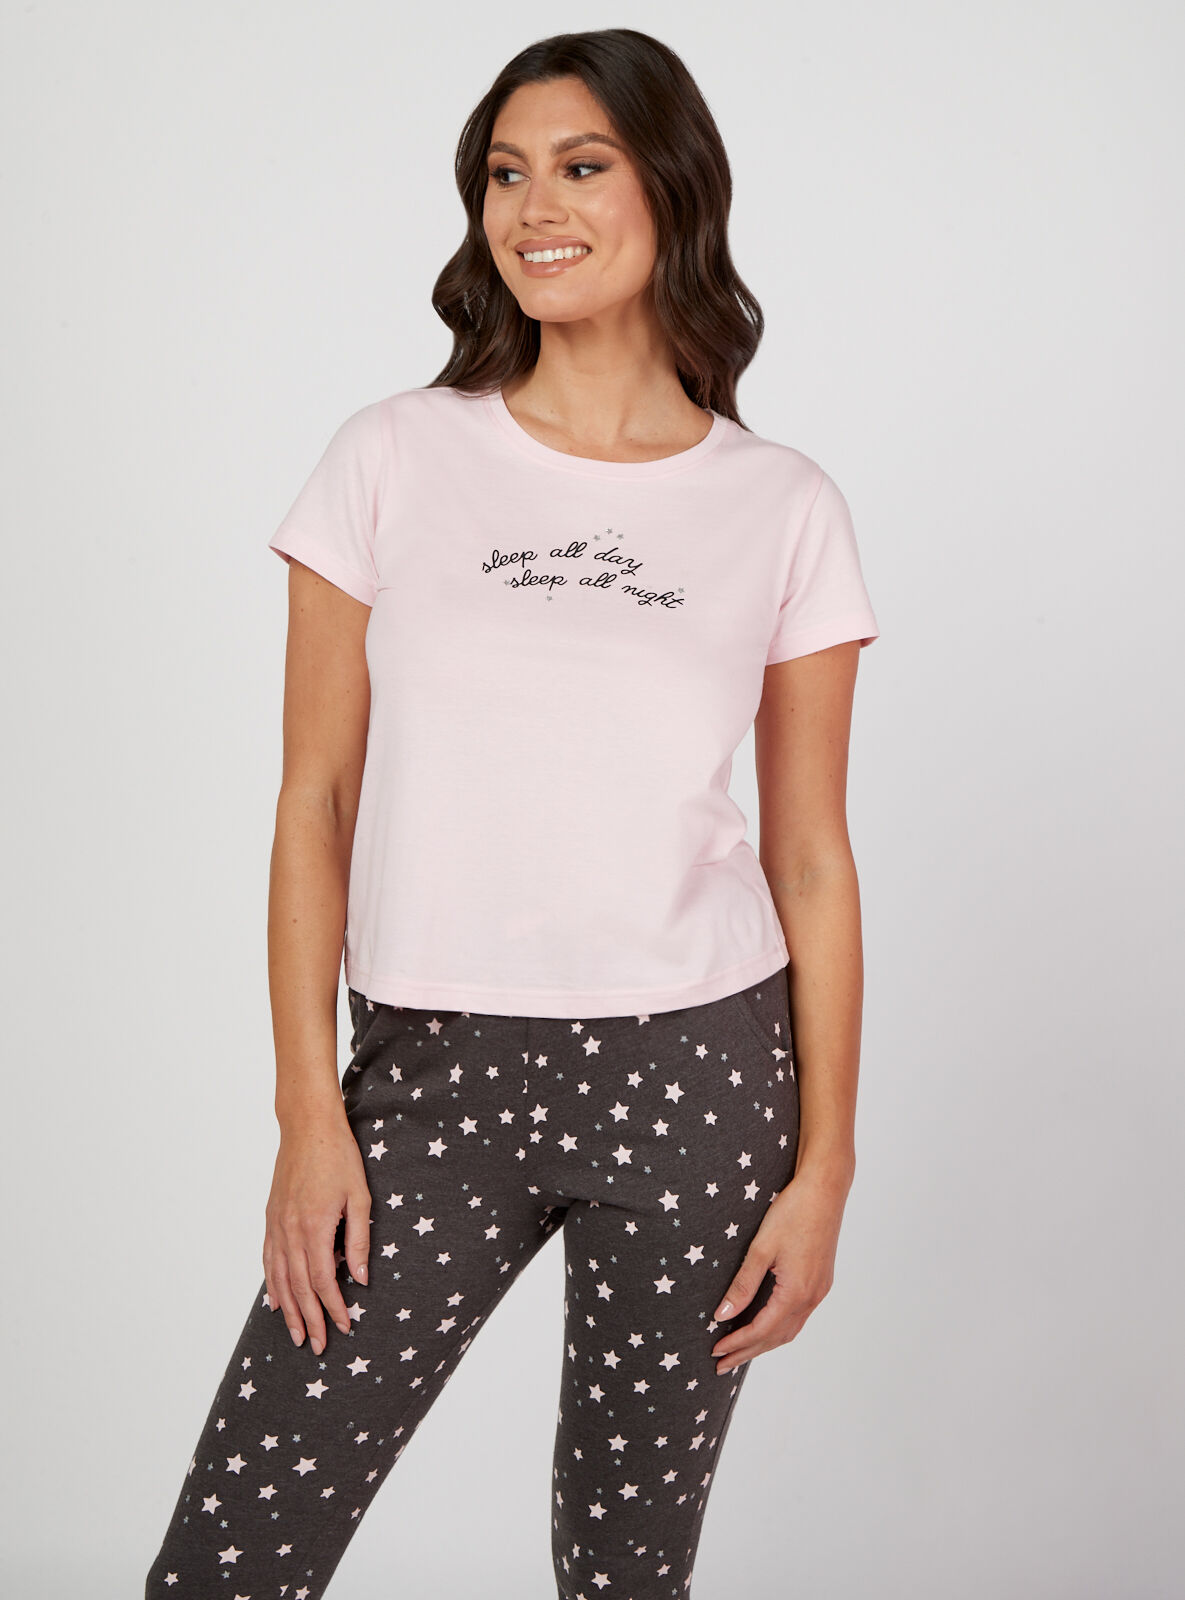 Boux Avenue Sleep all day cotton tee and pants set - Pink Mix - 06